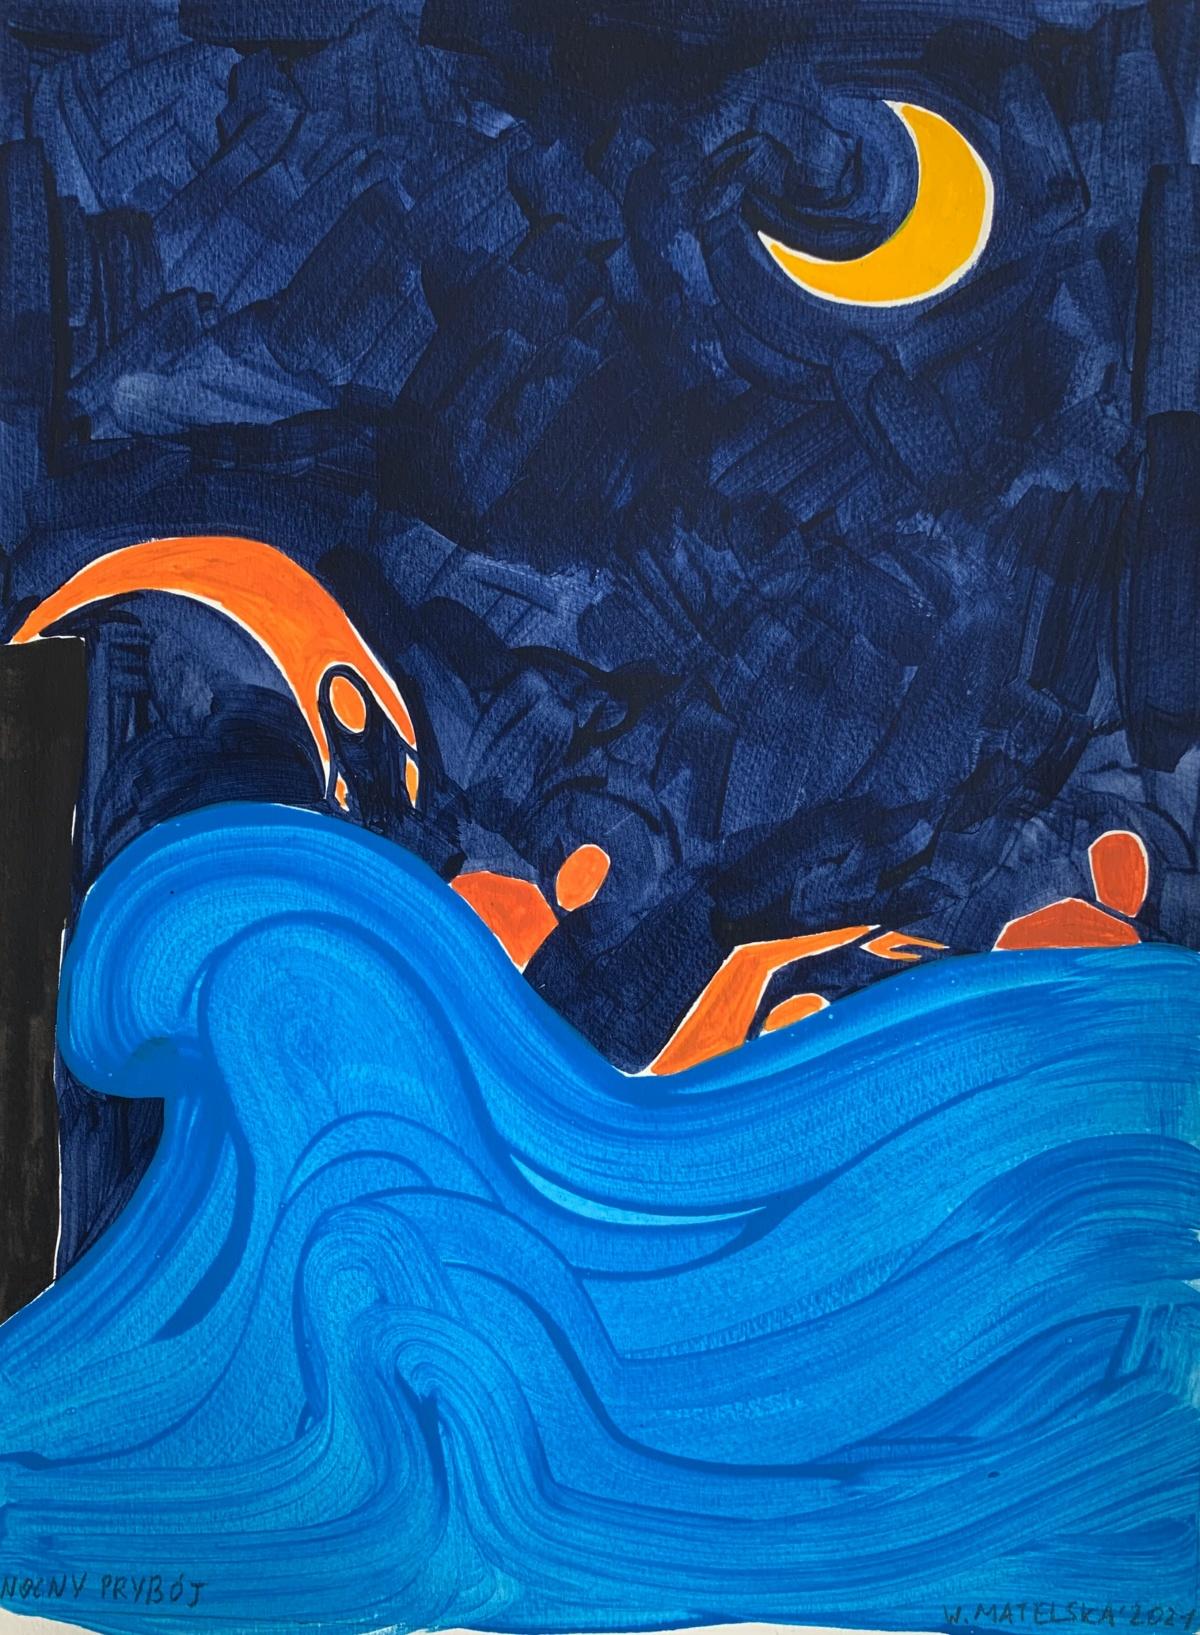 Figurative acrylic on paper painting by young professional European artist Waleria Matelska. Artwork is minimalistic and composed with synthetic shapes. Painting is vibrant- main colors are blue and orange. Scene takes place in the water during